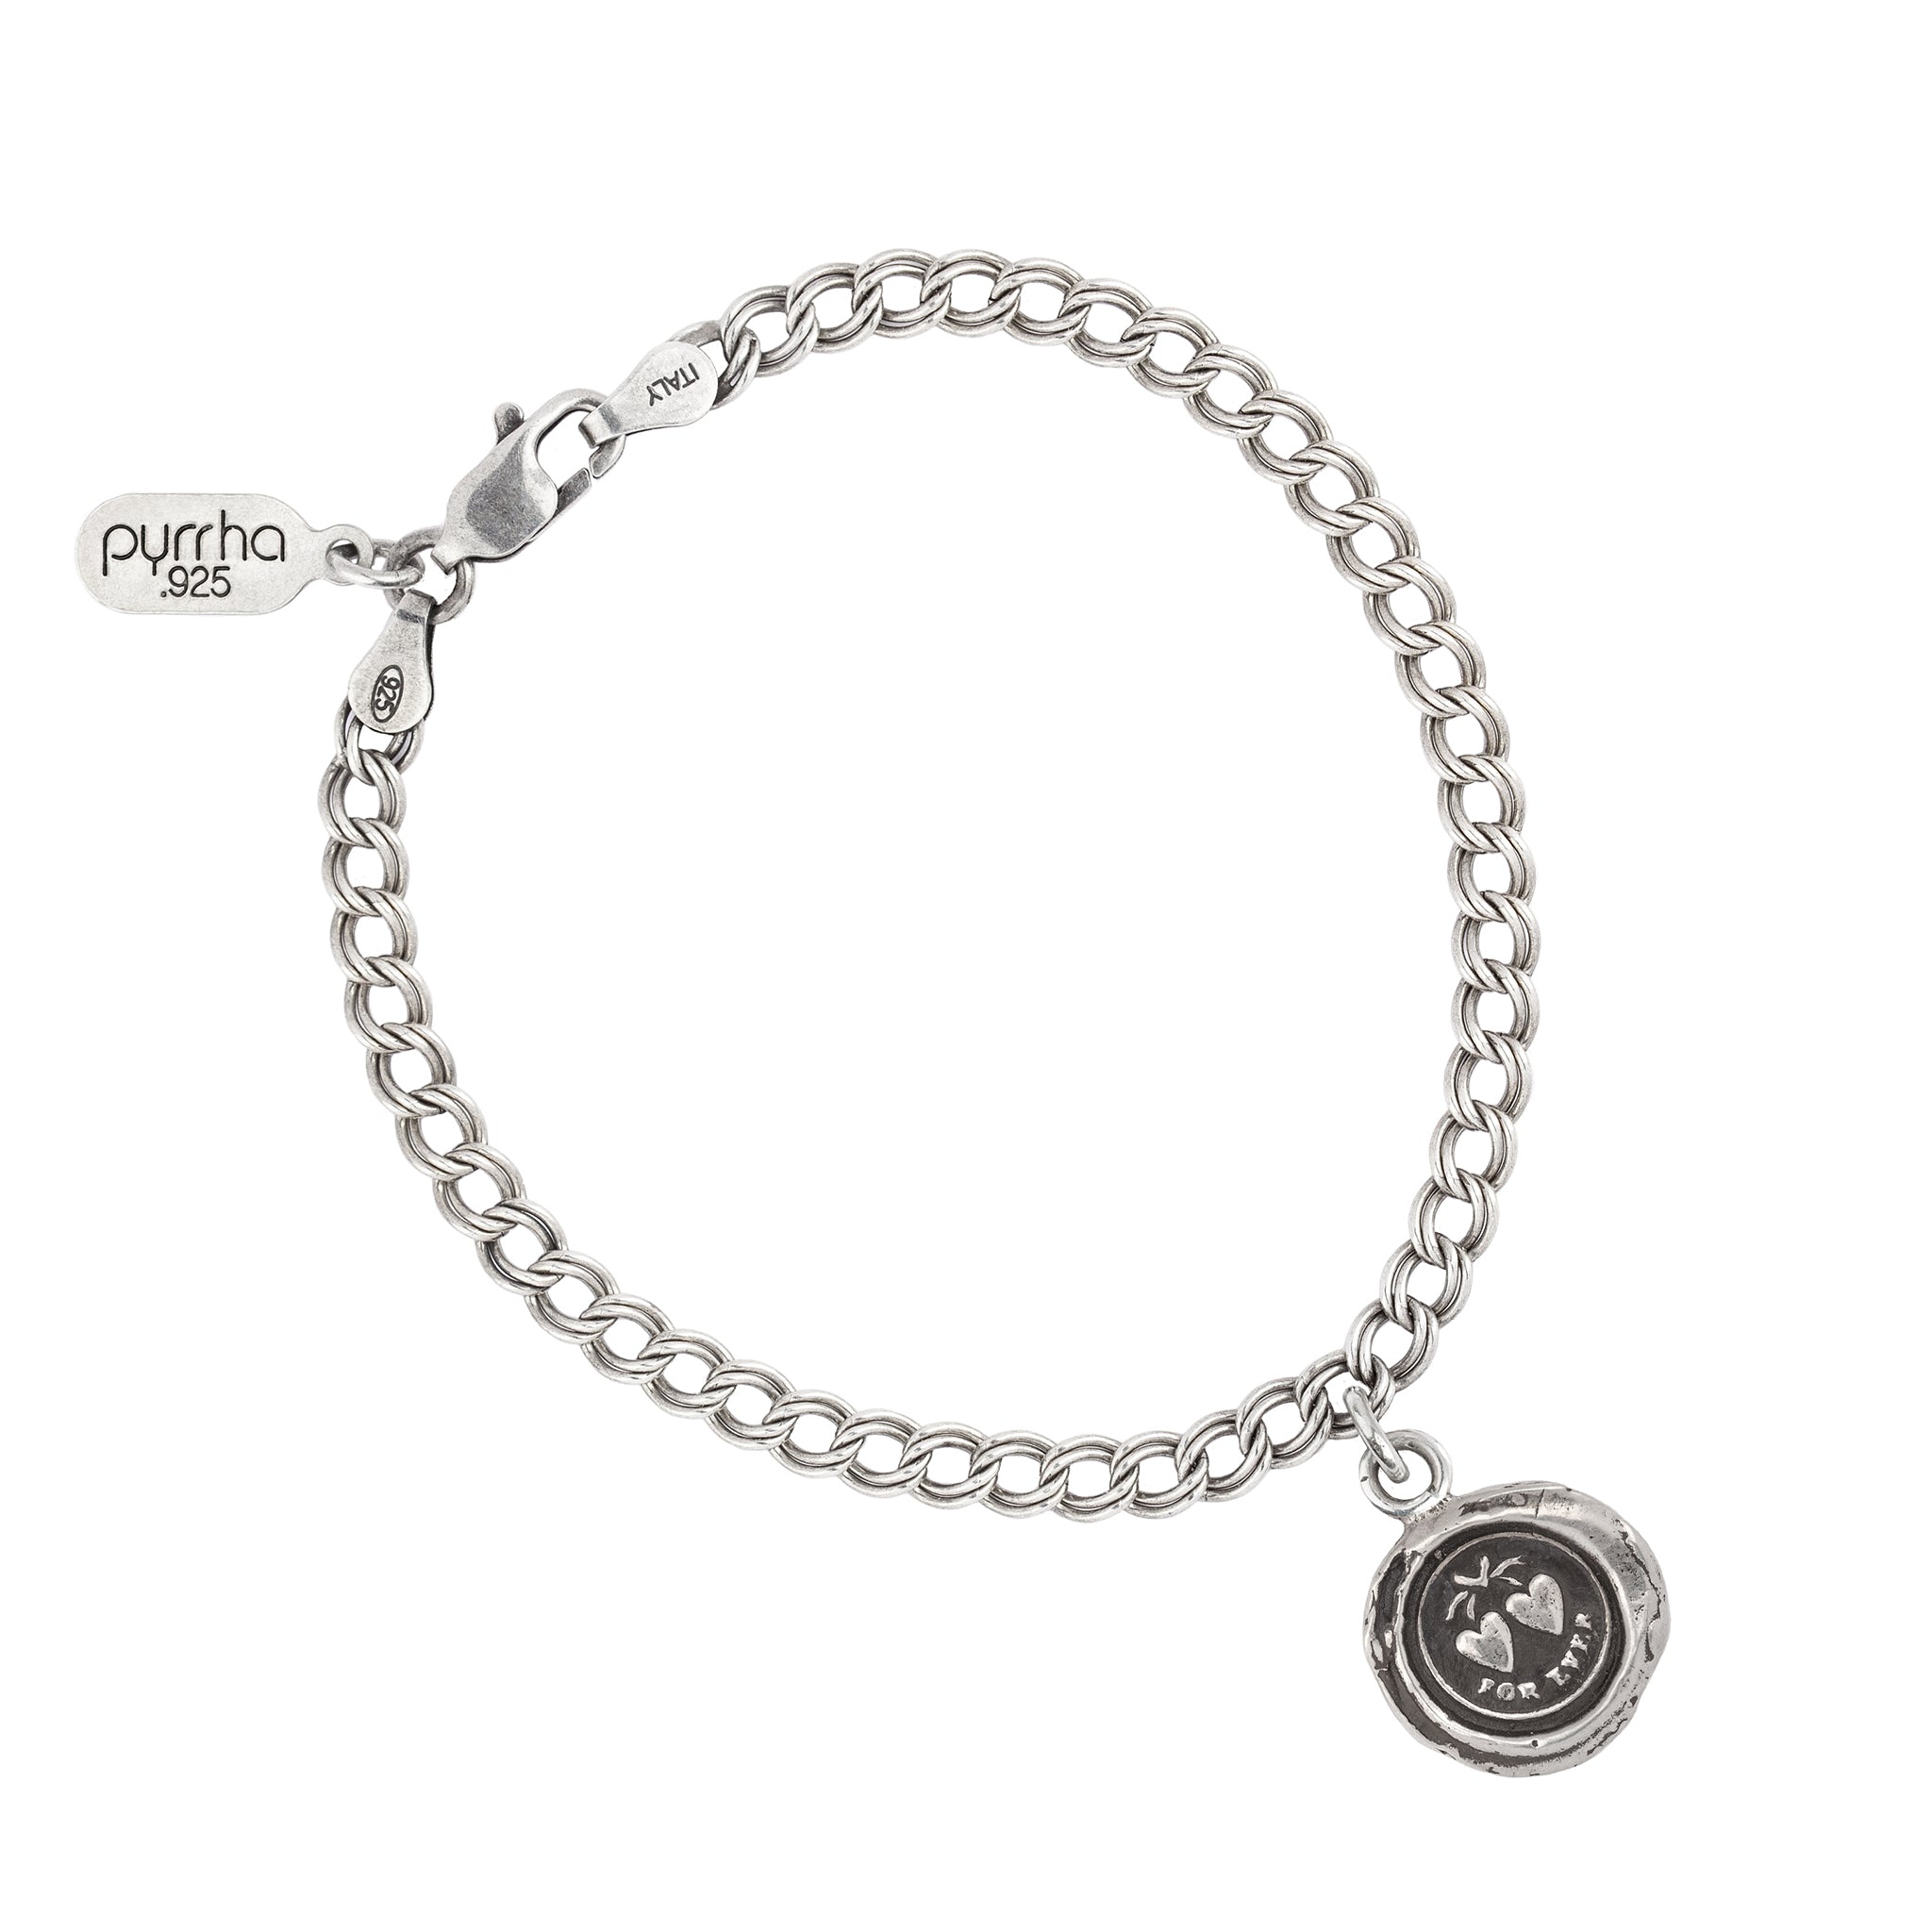 Talisman Charm Clasp Chain | Fine Jewelry Collection | 12th House 14K White Gold / [bracelet] 6.5 inch Chain